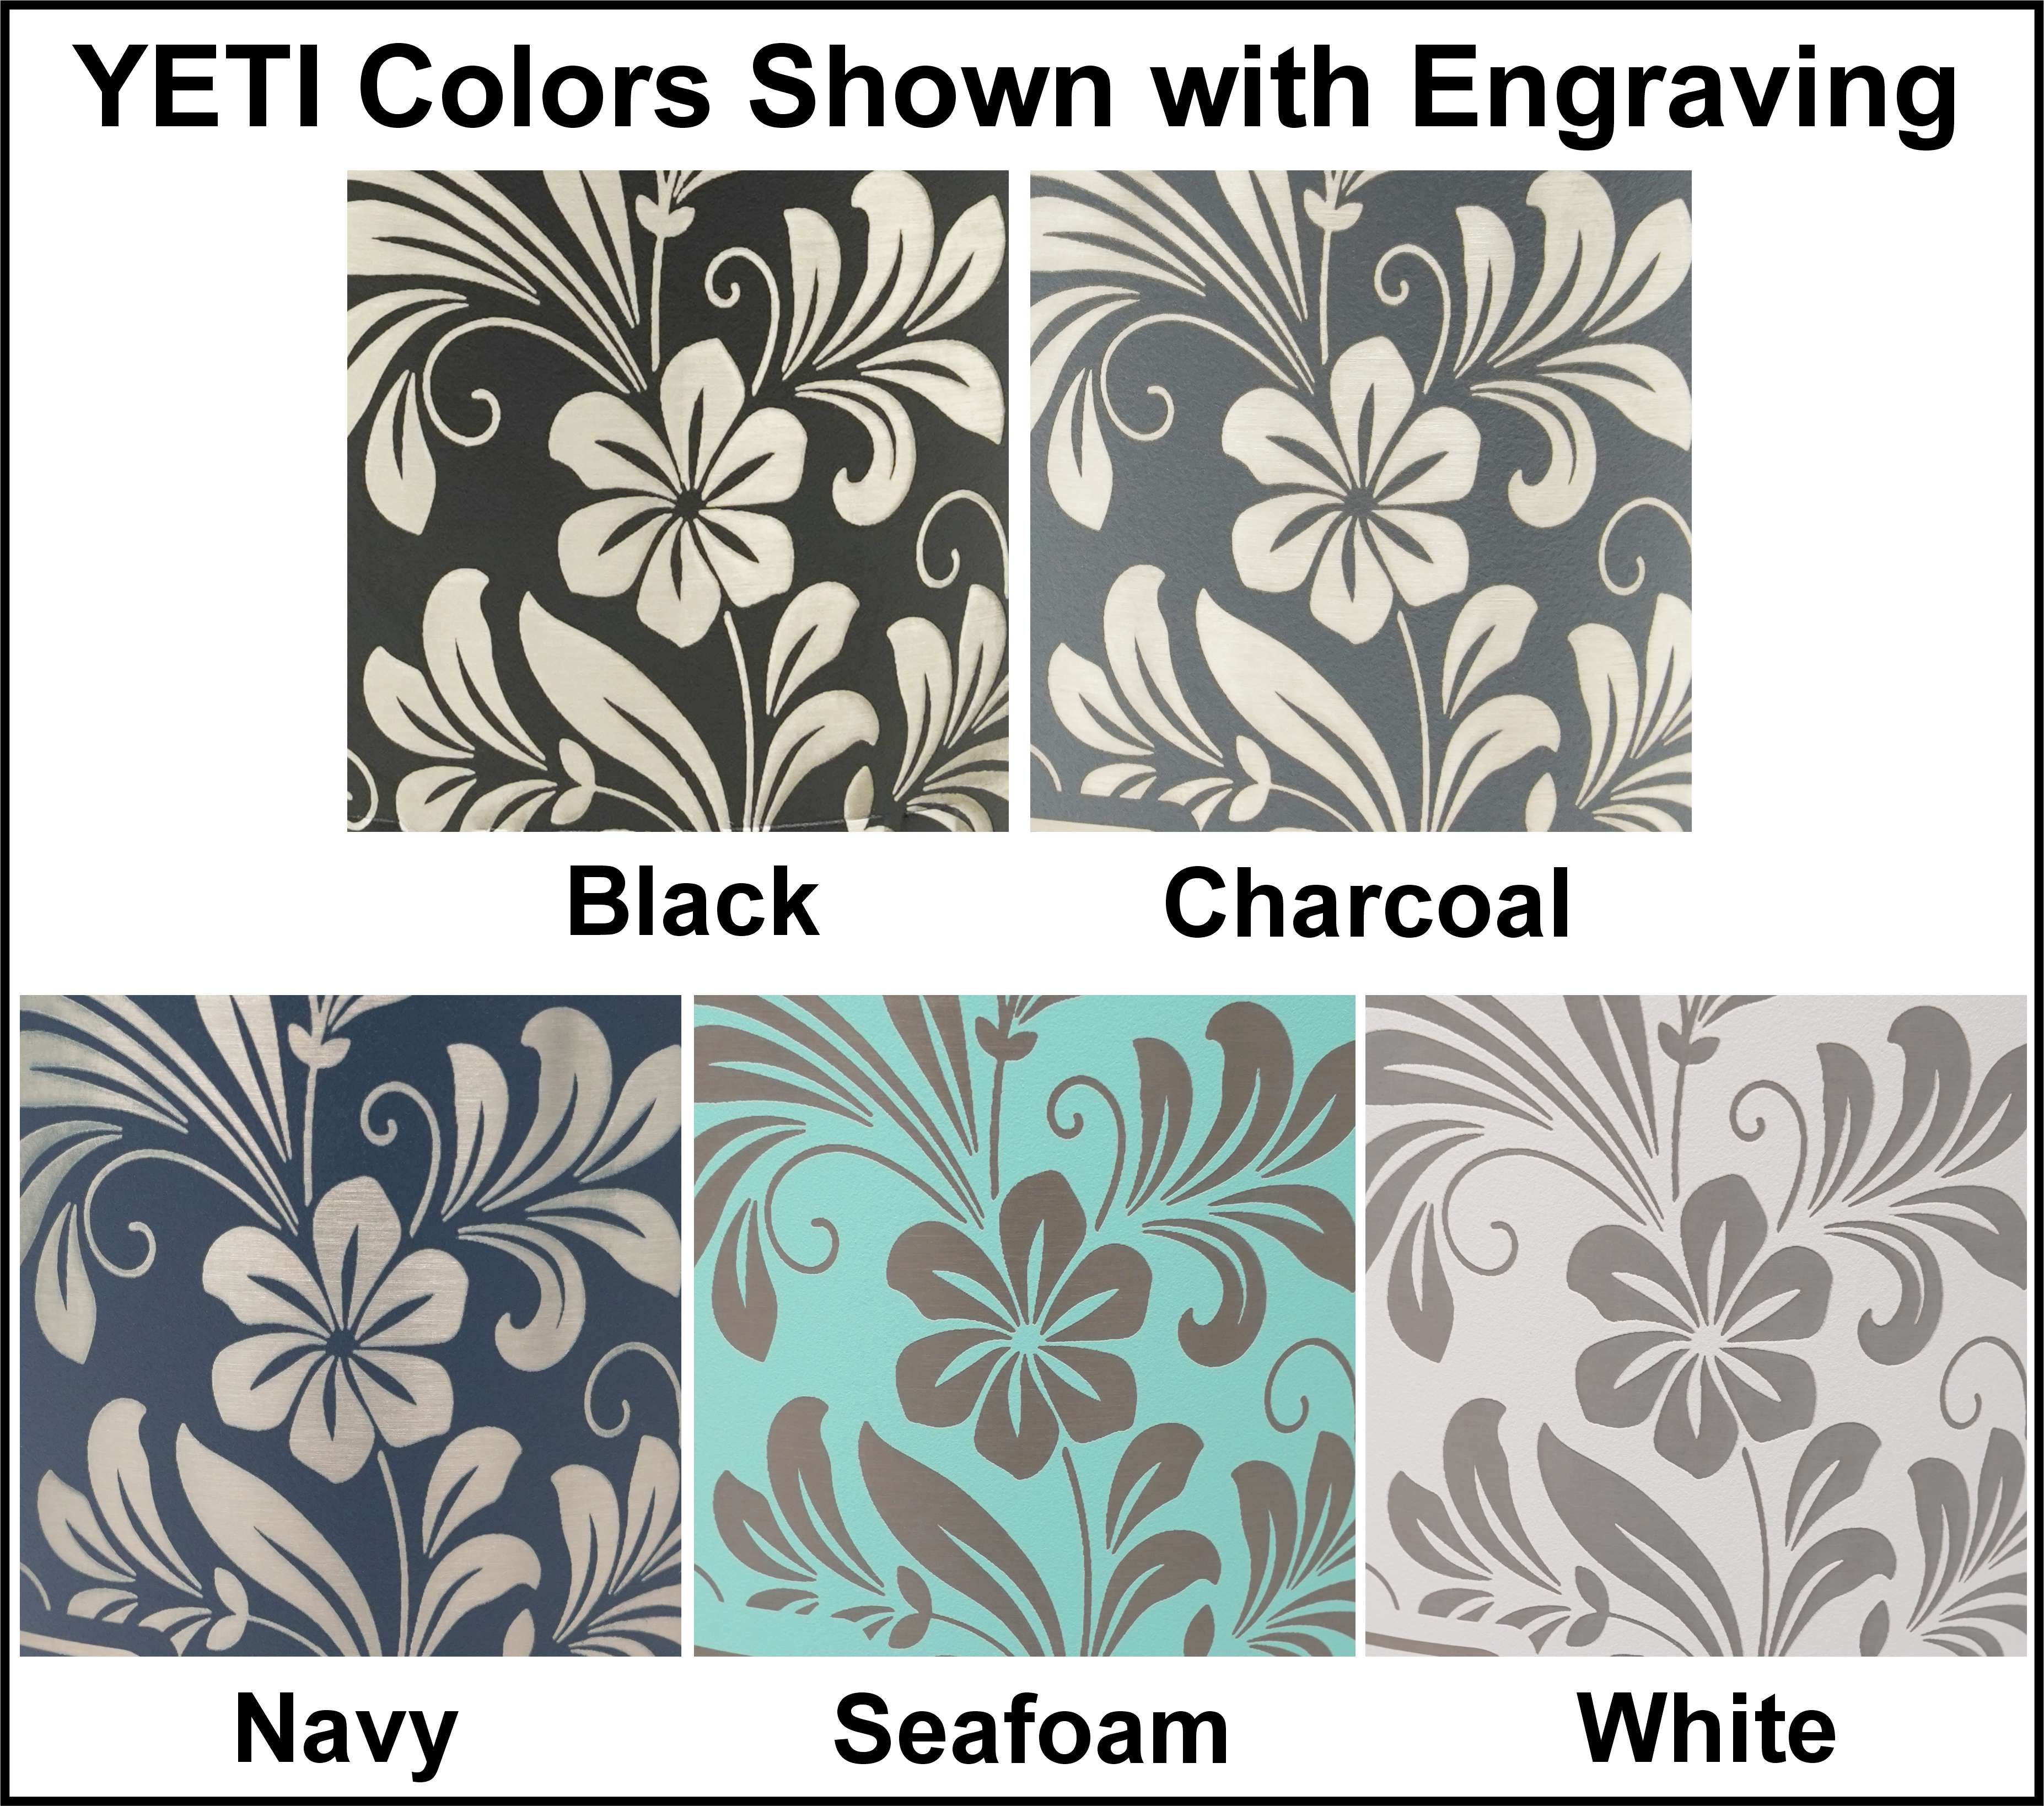 Laser engraved hibiscus flower pattern shown in each Yeti tumbler color.